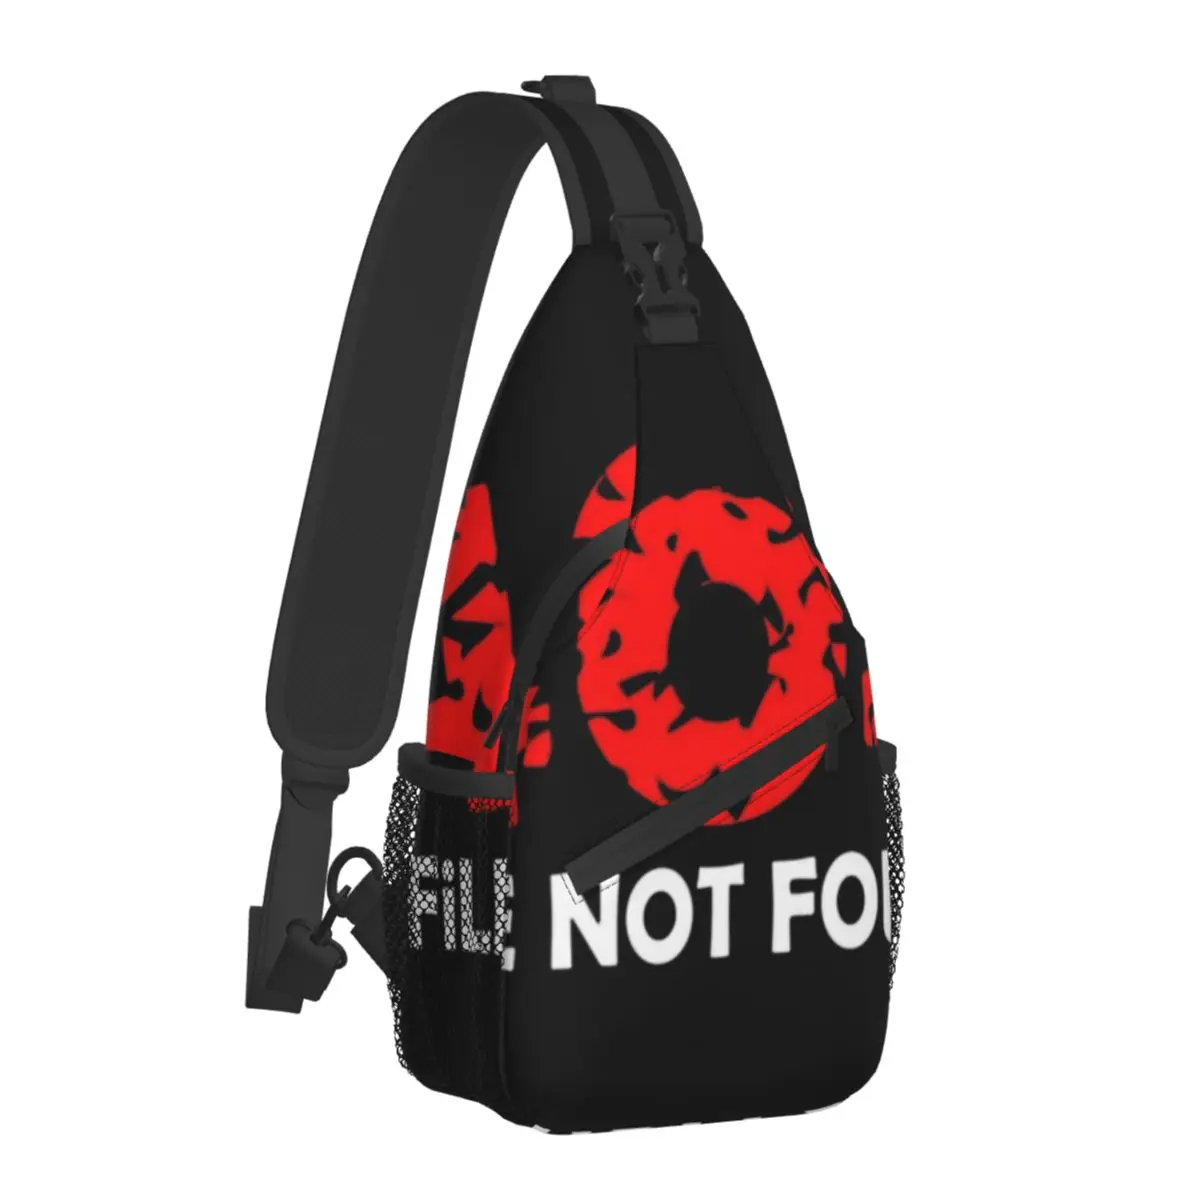 

Bad Notice Chest Bags Boy Error 404 File Not Found Sports Shoulder Bag Funny Designer Small Bag Phone Daily Sling Bags